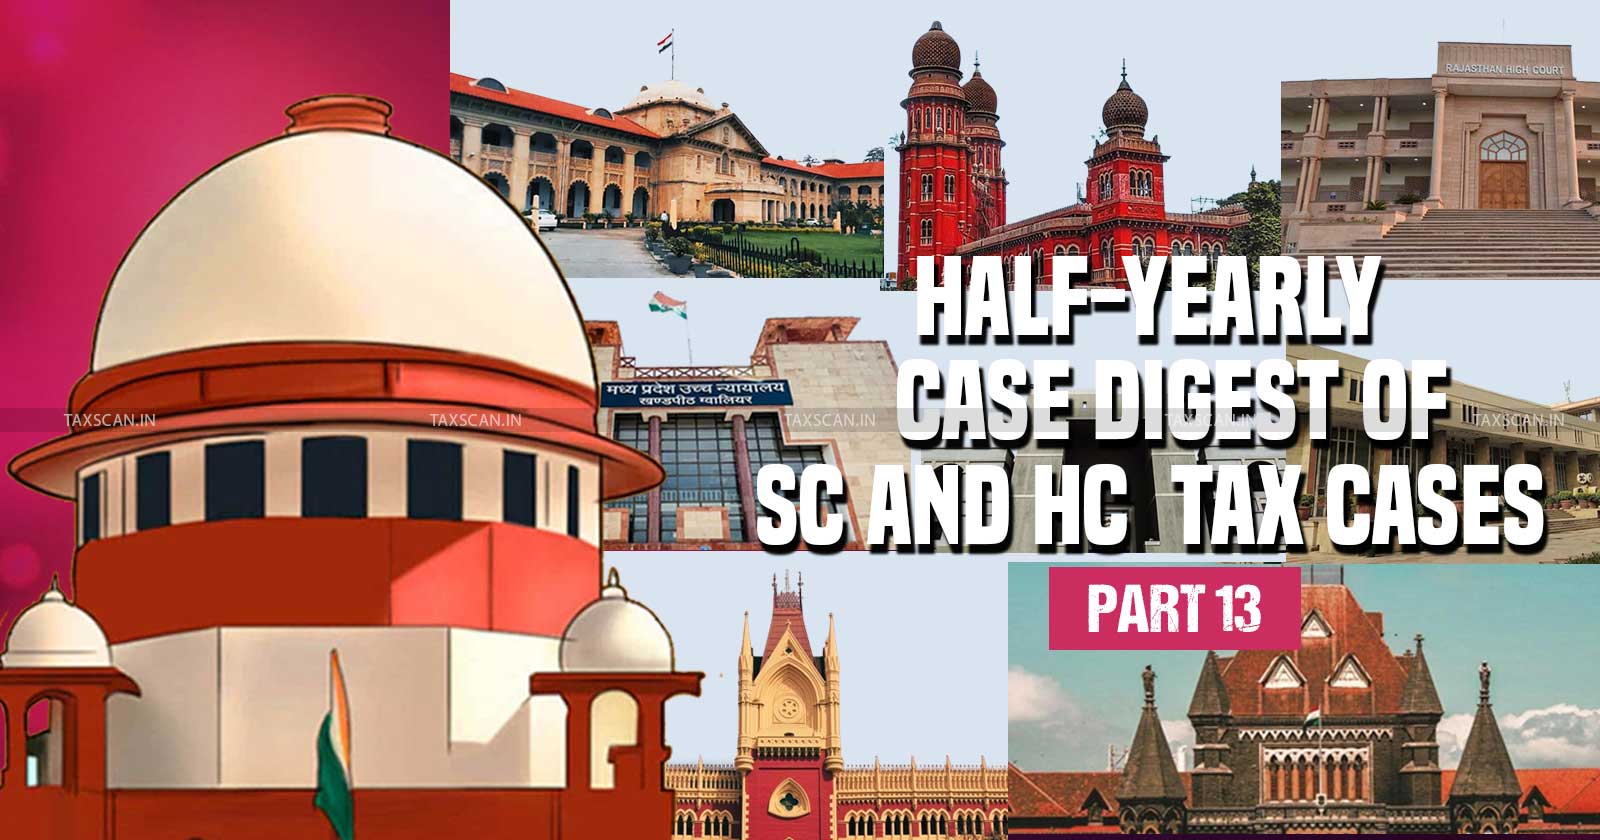 Half Yearly Case Digest - Supreme Court and High Courts Case Digest - Half Yearly Digest of Tax Cases - Supreme Court Tax Judgments - High Court Tax Judgments - Tax Digest - taxscan